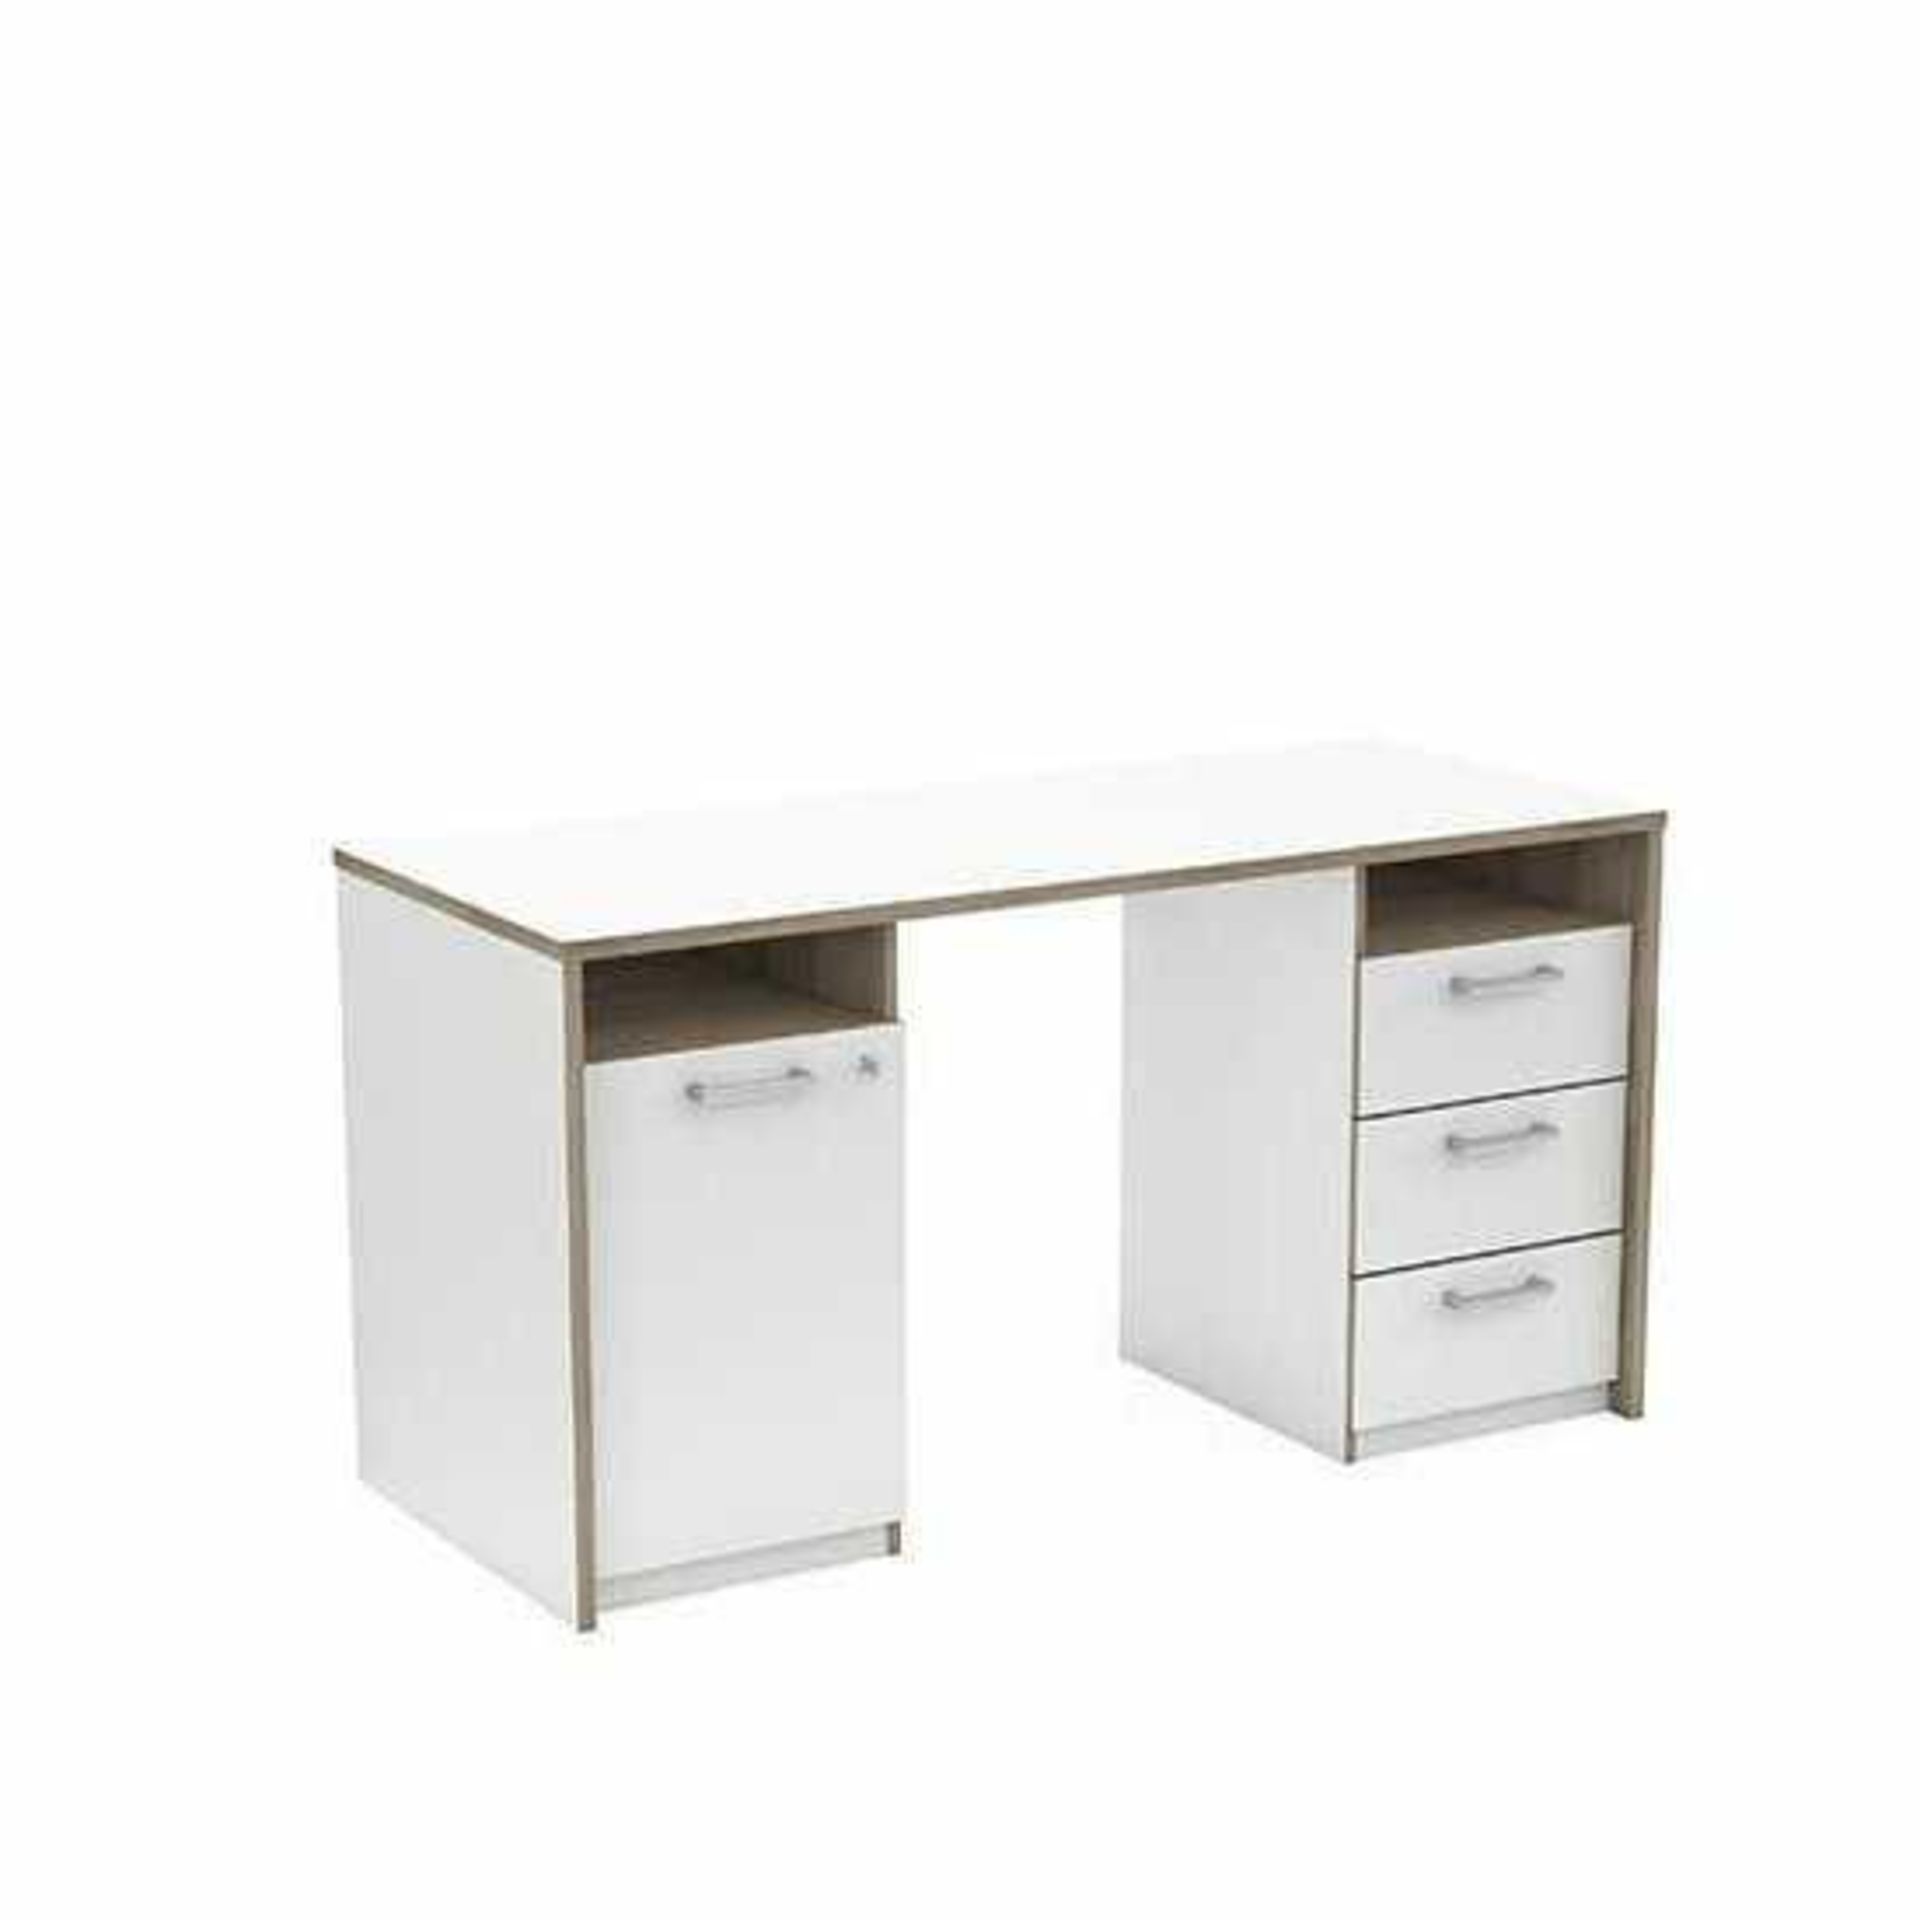 (Db) RRP £310 Lot To Contain One Boxed Maison Computer Desk In Matt White And Oak With 1 Door. 75.7